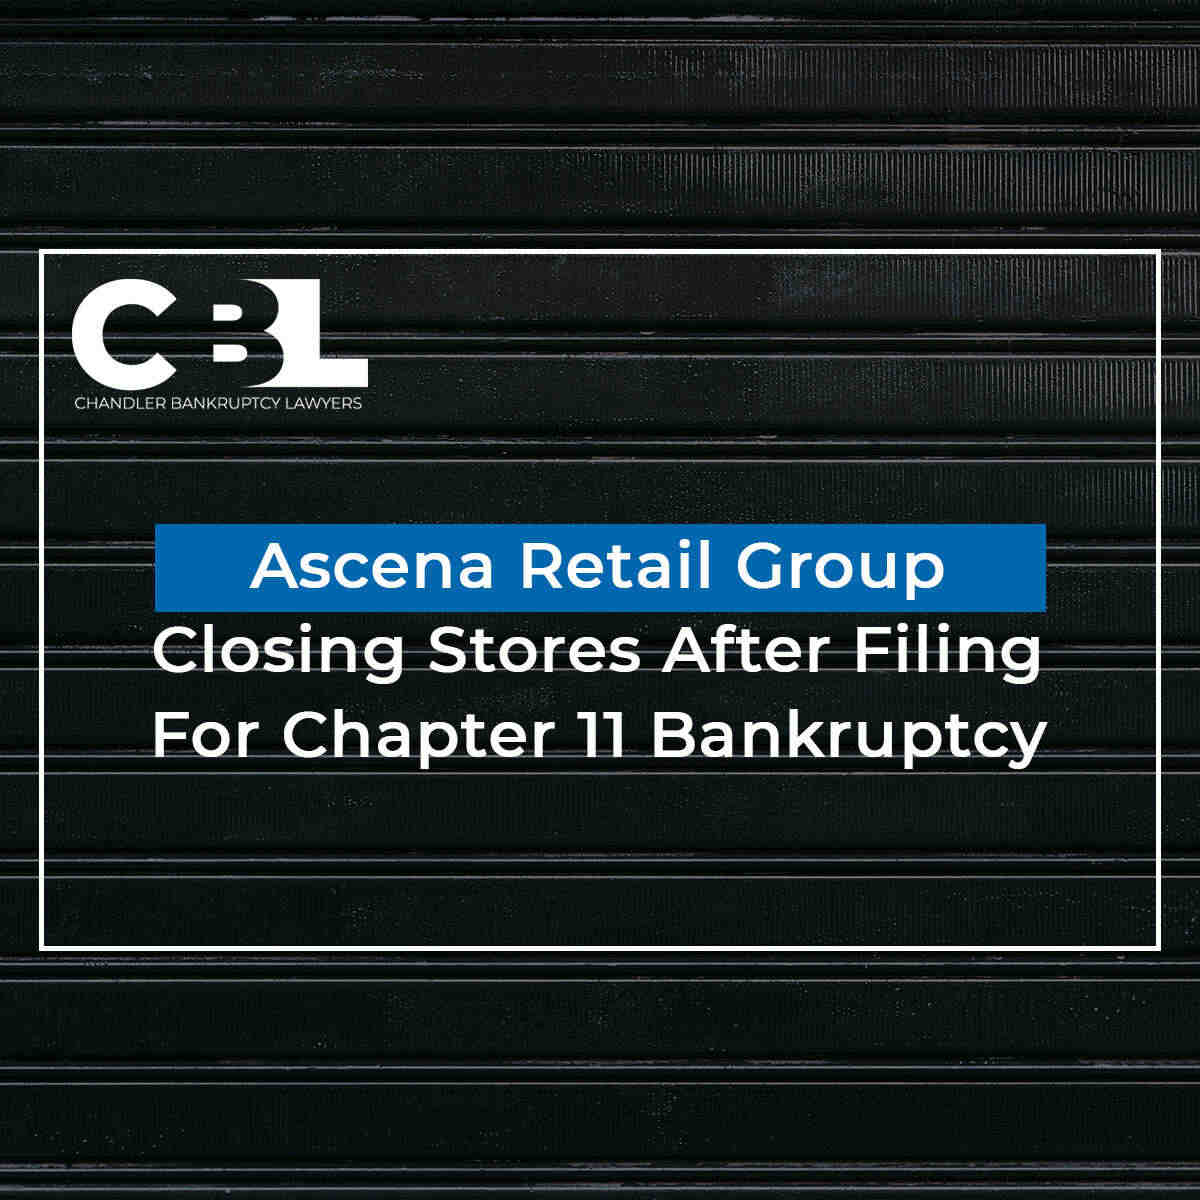 Ascena Retail Group Closing Stores After Filing For Chapter 11 Bankruptcy